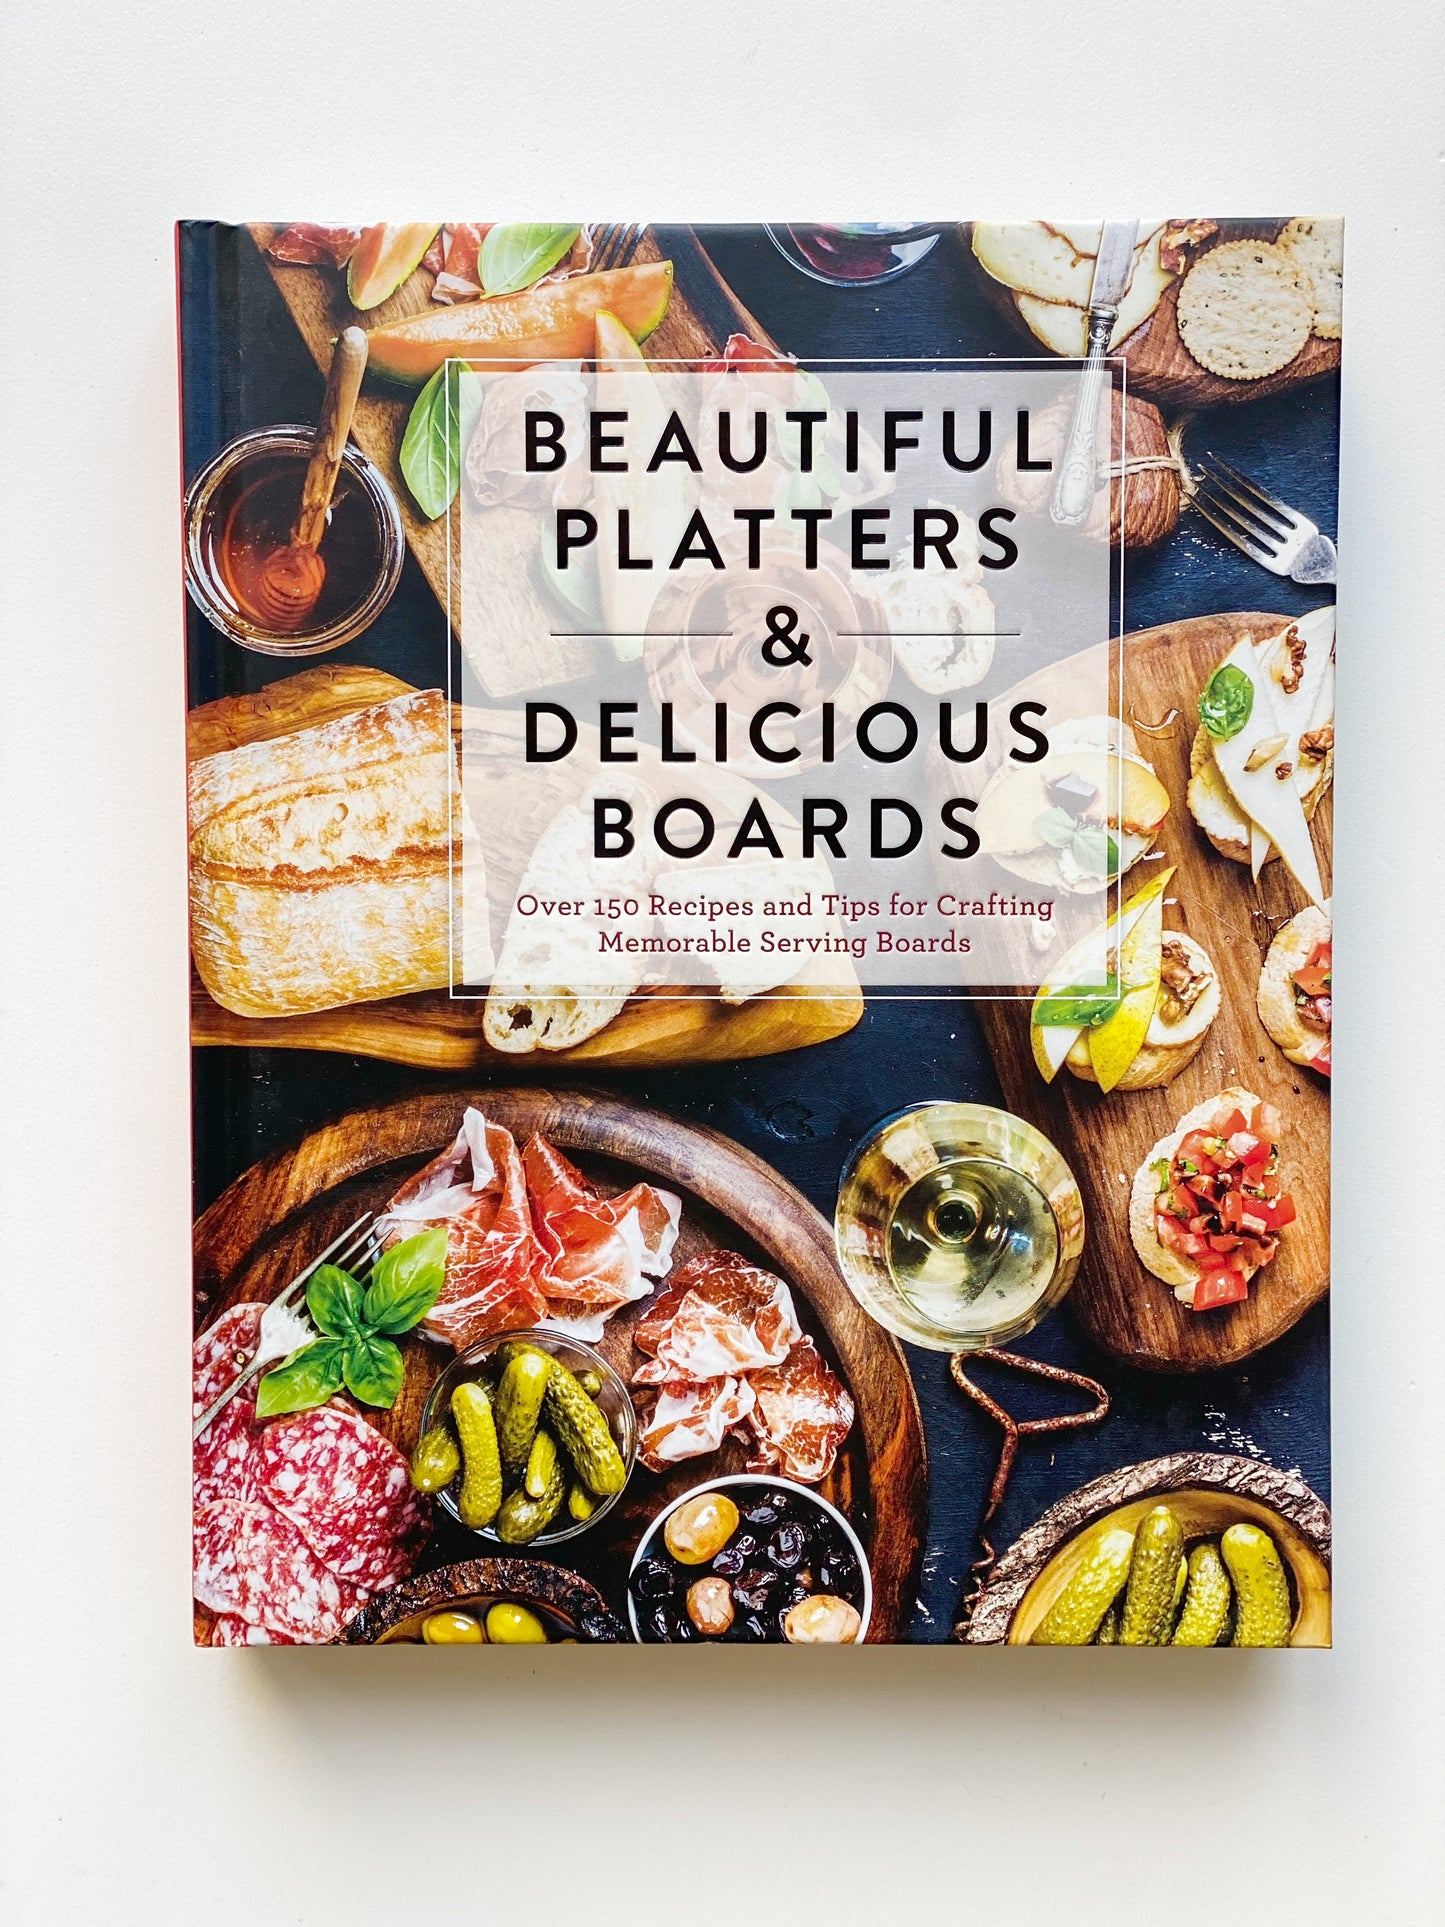 Beautiful Platters & Delicious Boards Book